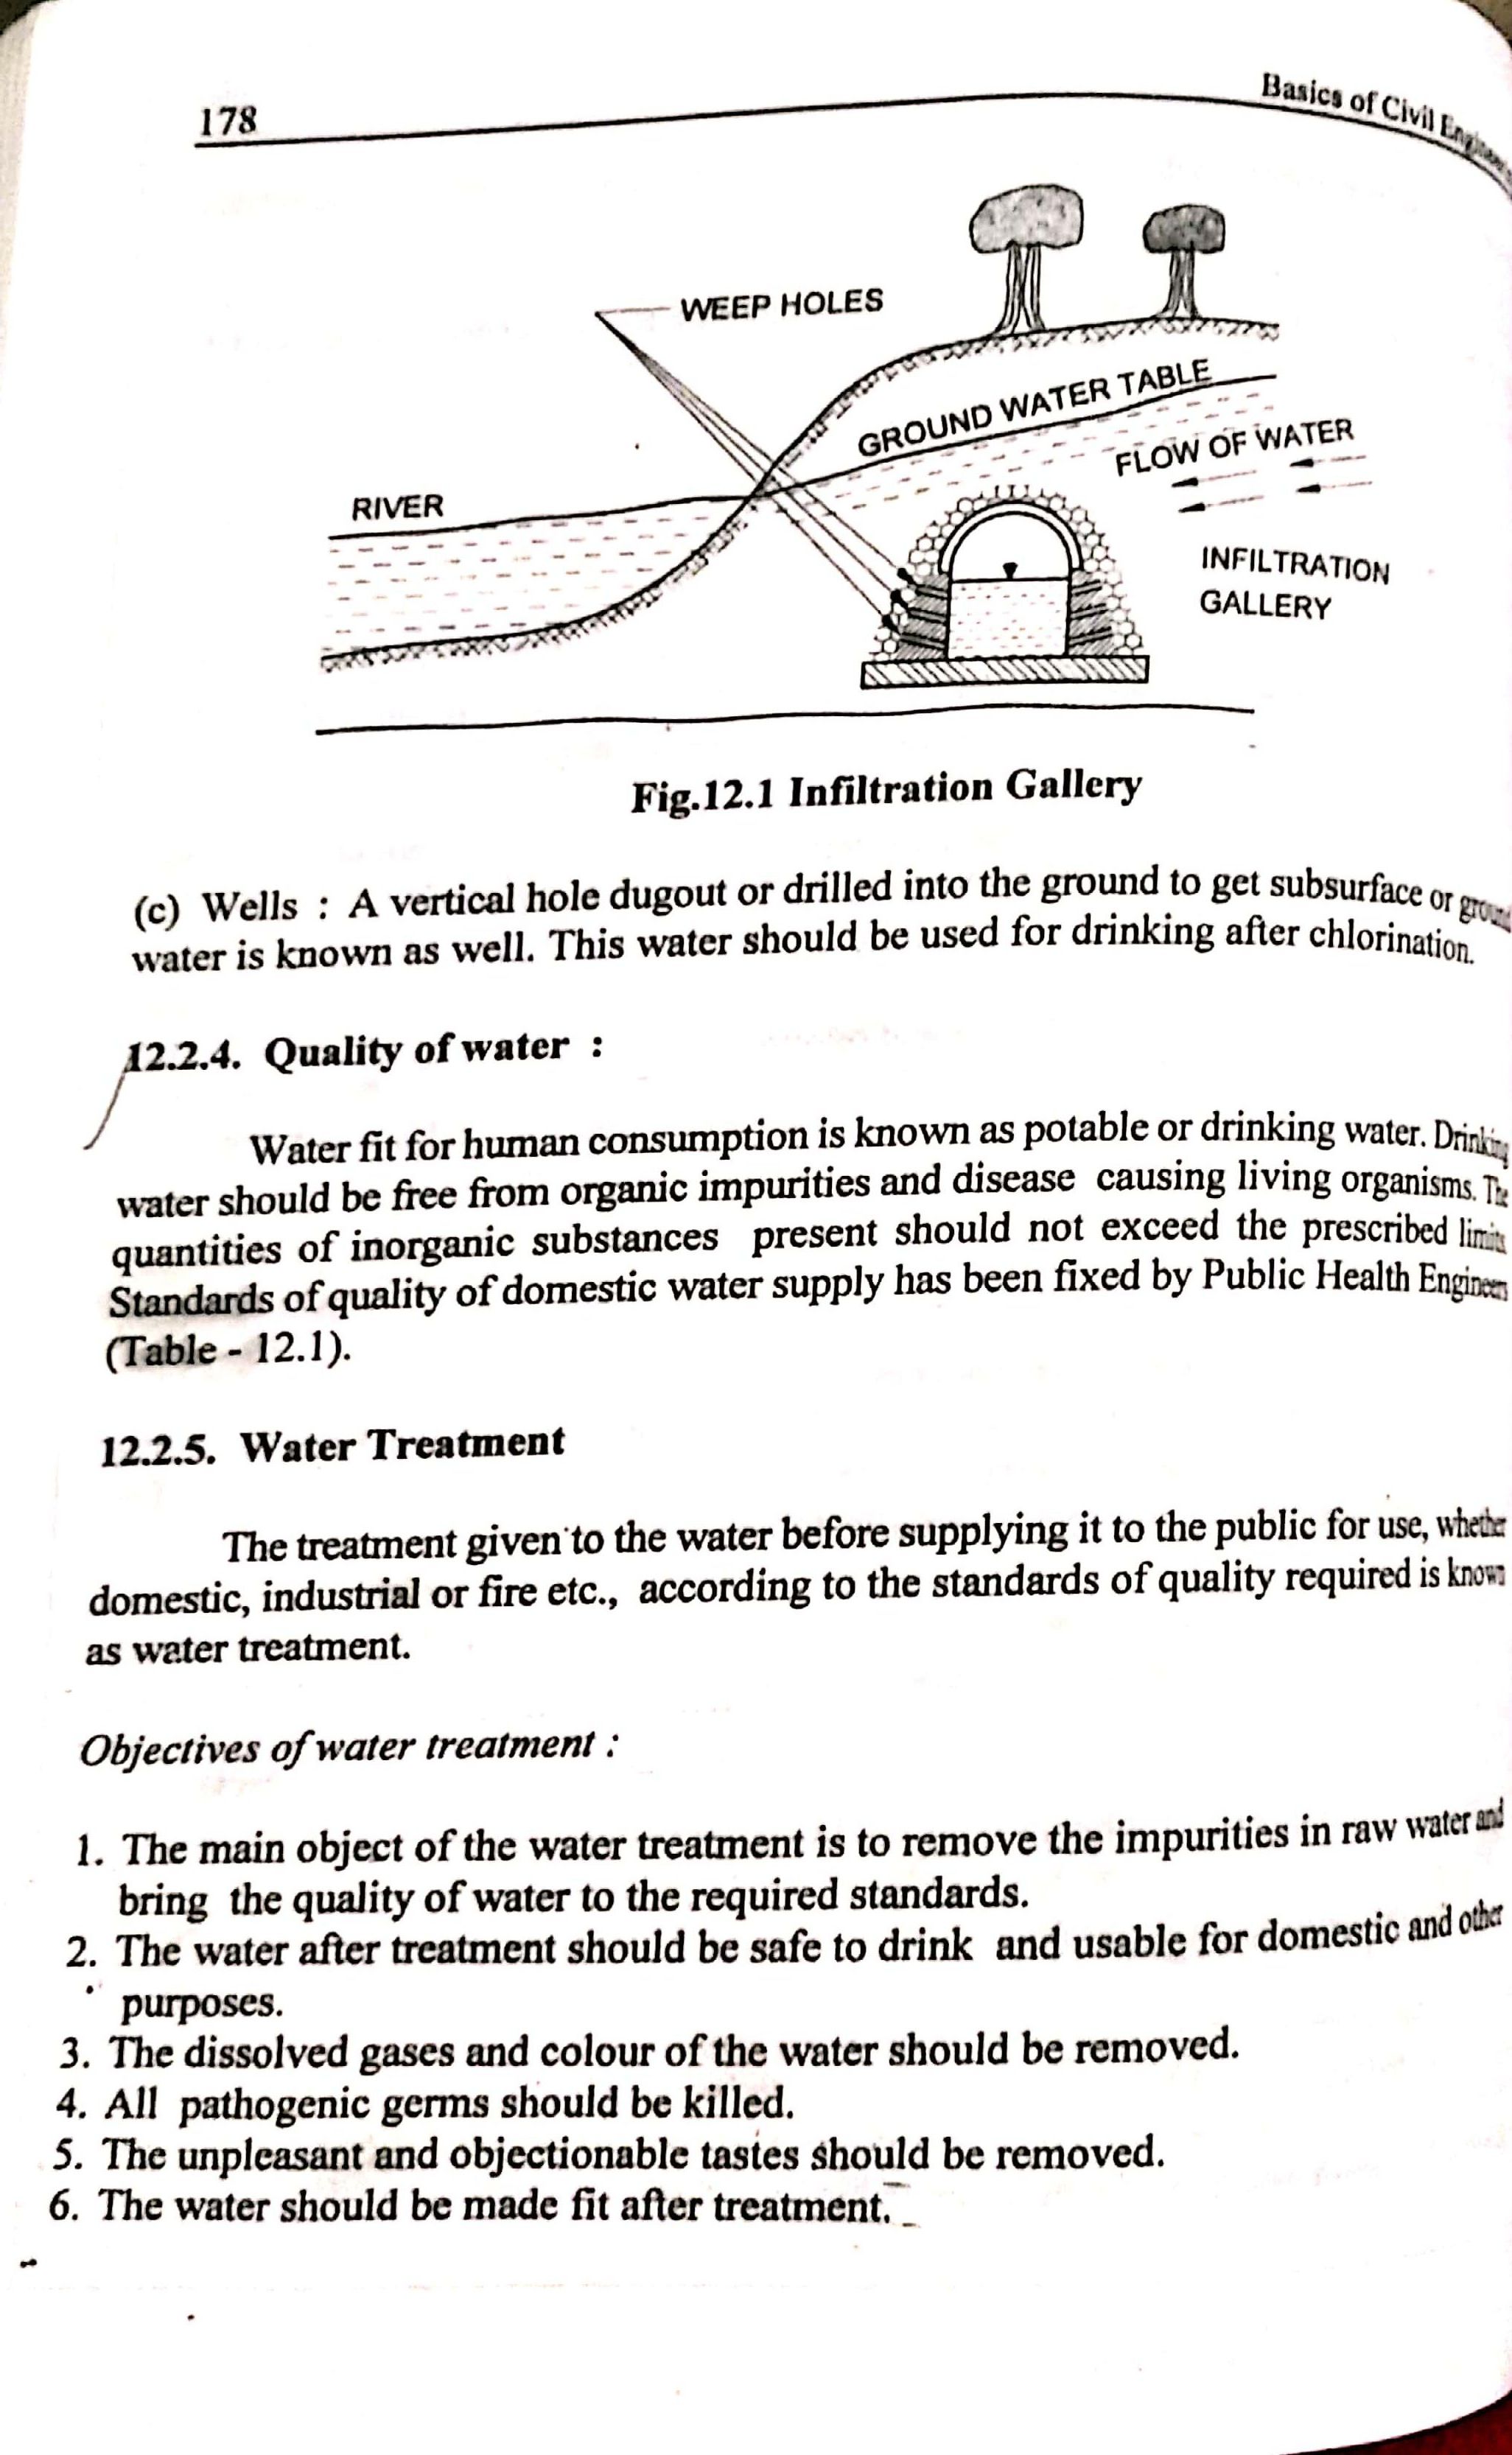 Quality of water and water treatment -New Doc 2019-11-30 20.41.41_79.jpg